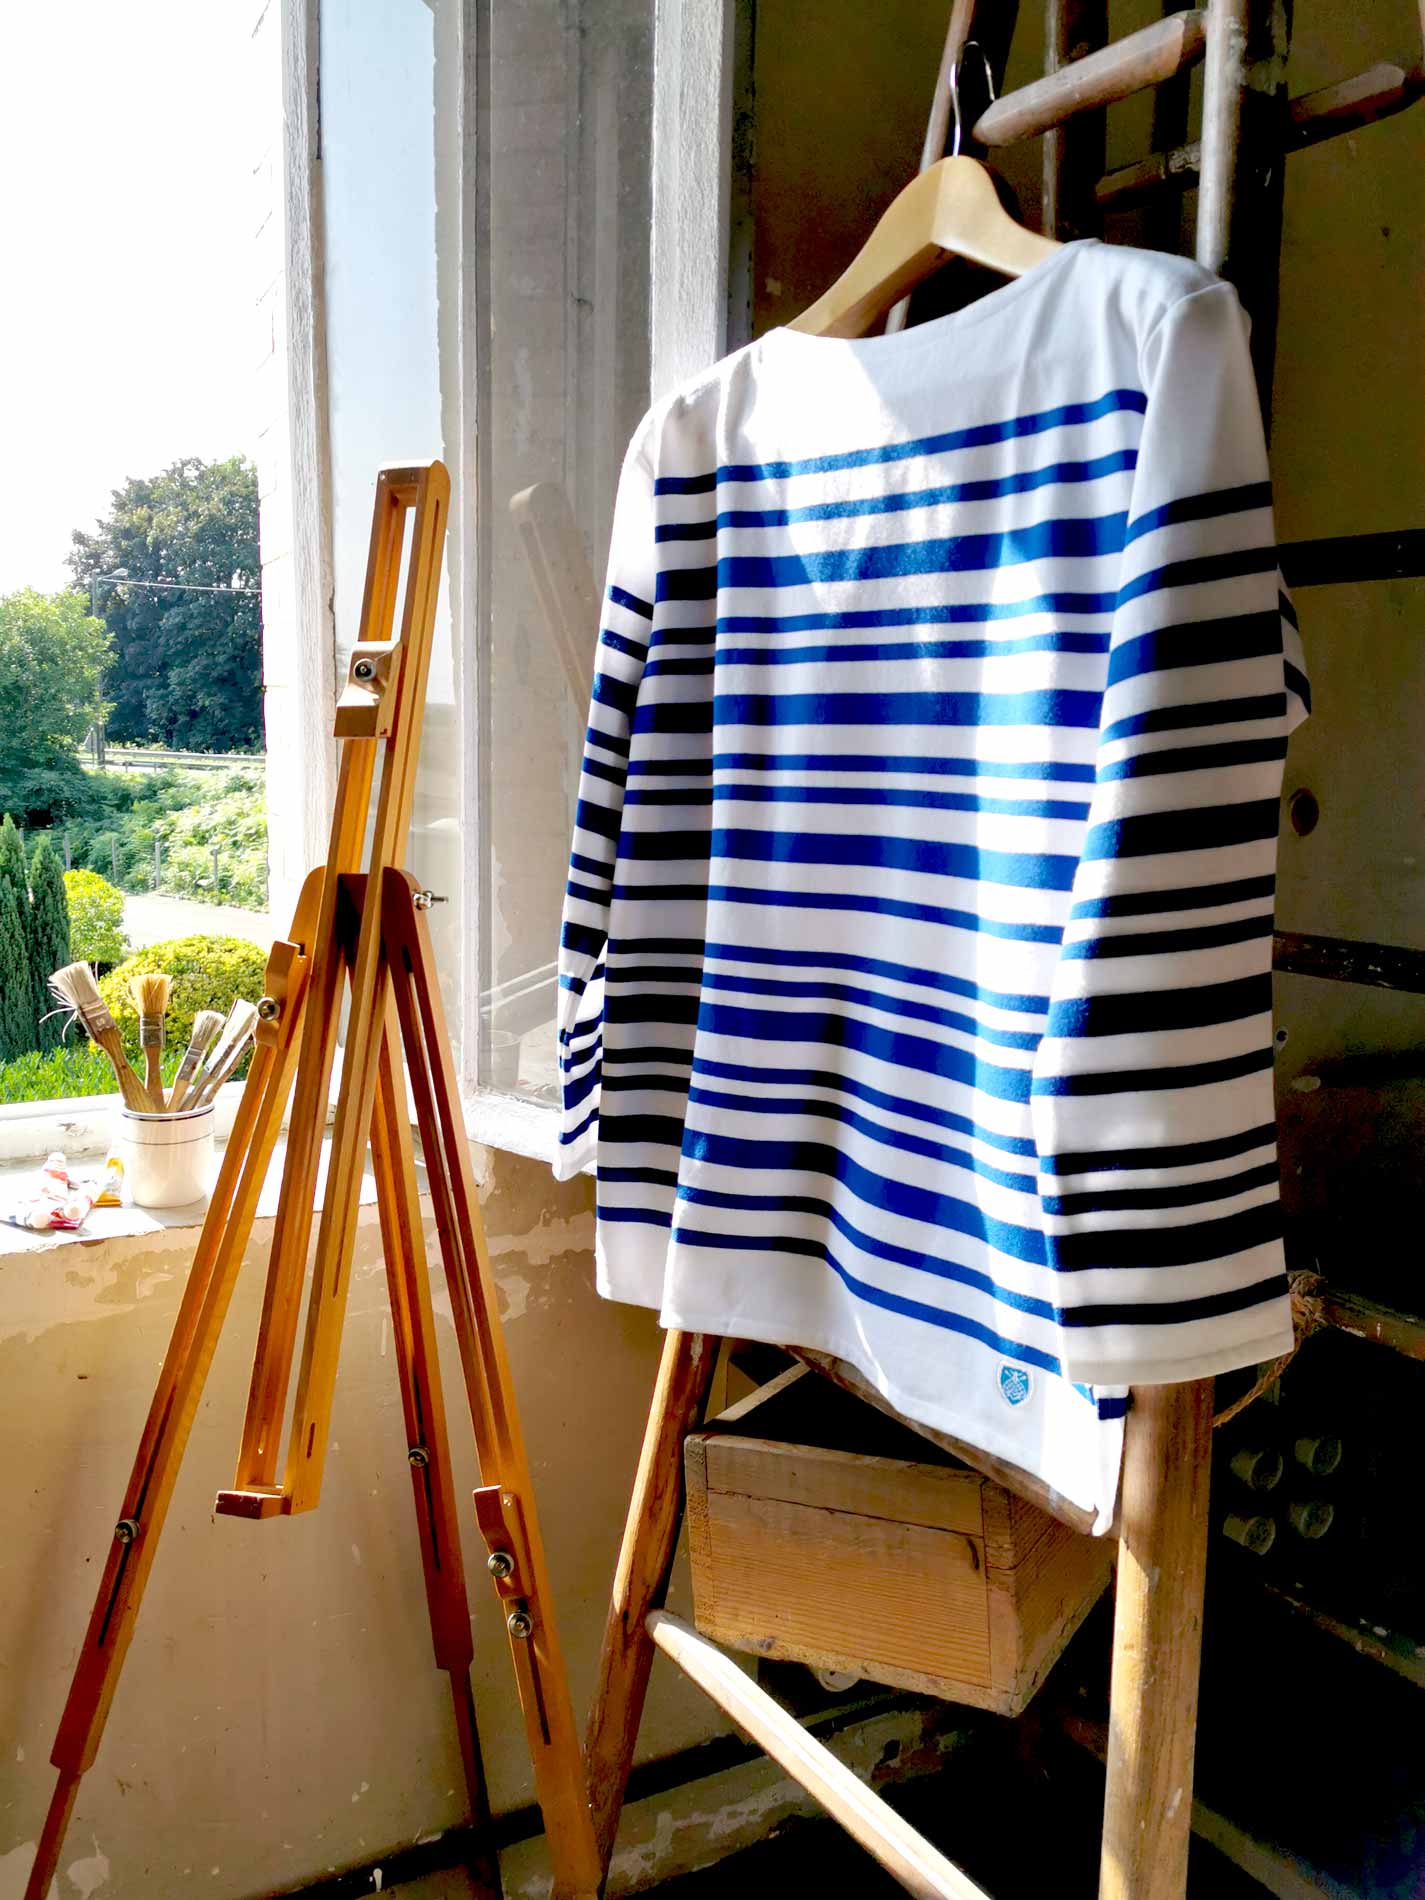 The sailor's striped shirt with irregular stripes